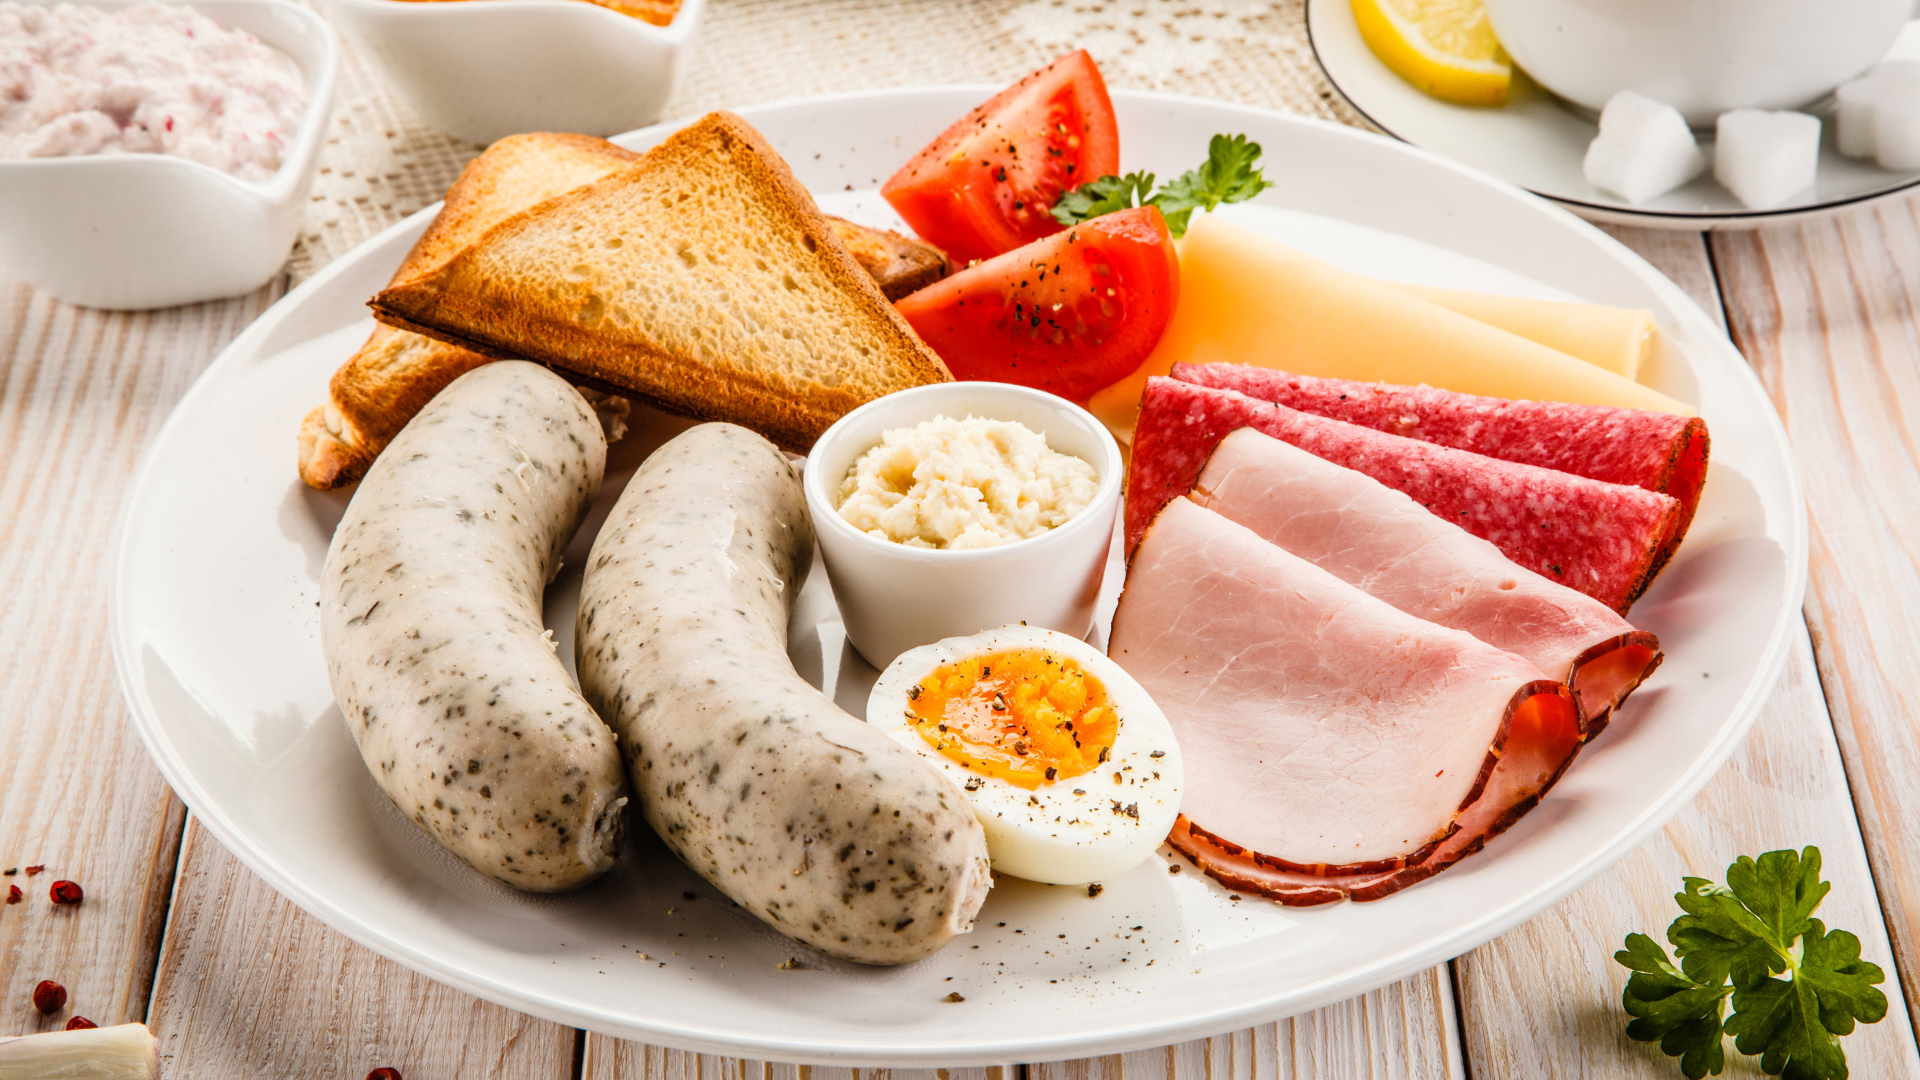 Large white plate with sausage, eggs, tomatoes, toast and cheese